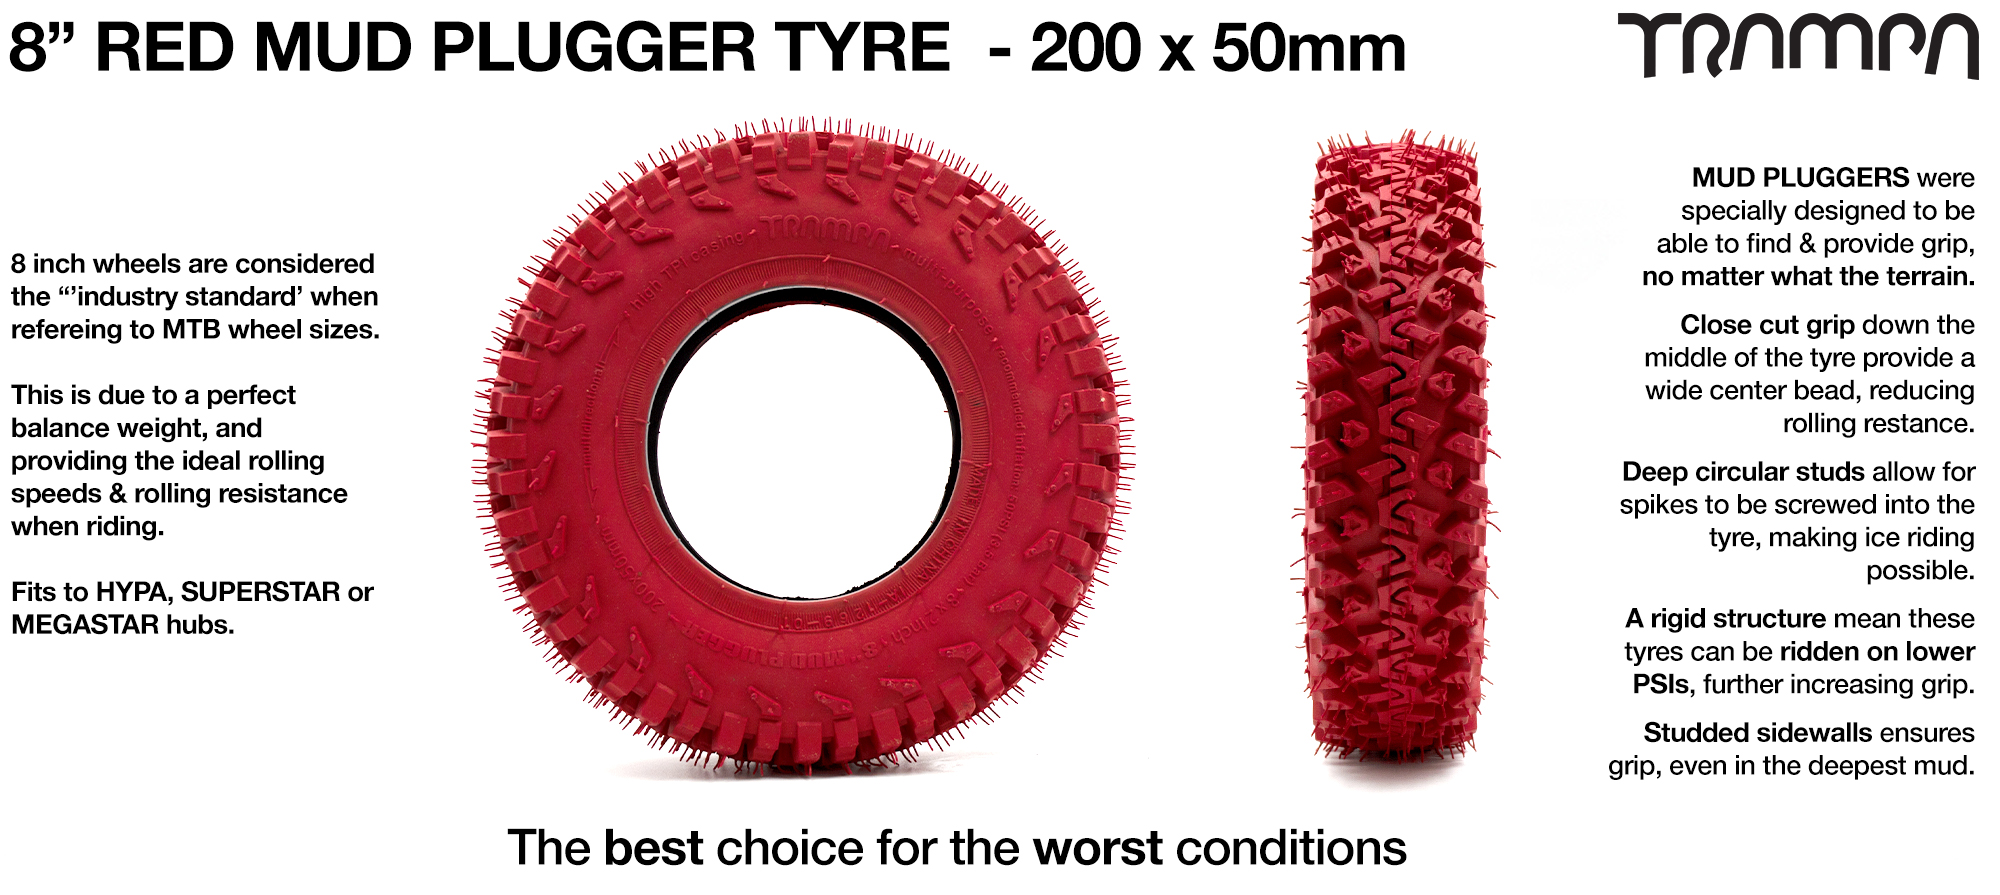 TRAMPA MUD-PLUGGER 8 Inch Tyre measure 3.75x 2x 8 Inch or 200x50mm with 3.75 inch Rim fits all 3.75 inch Hubs